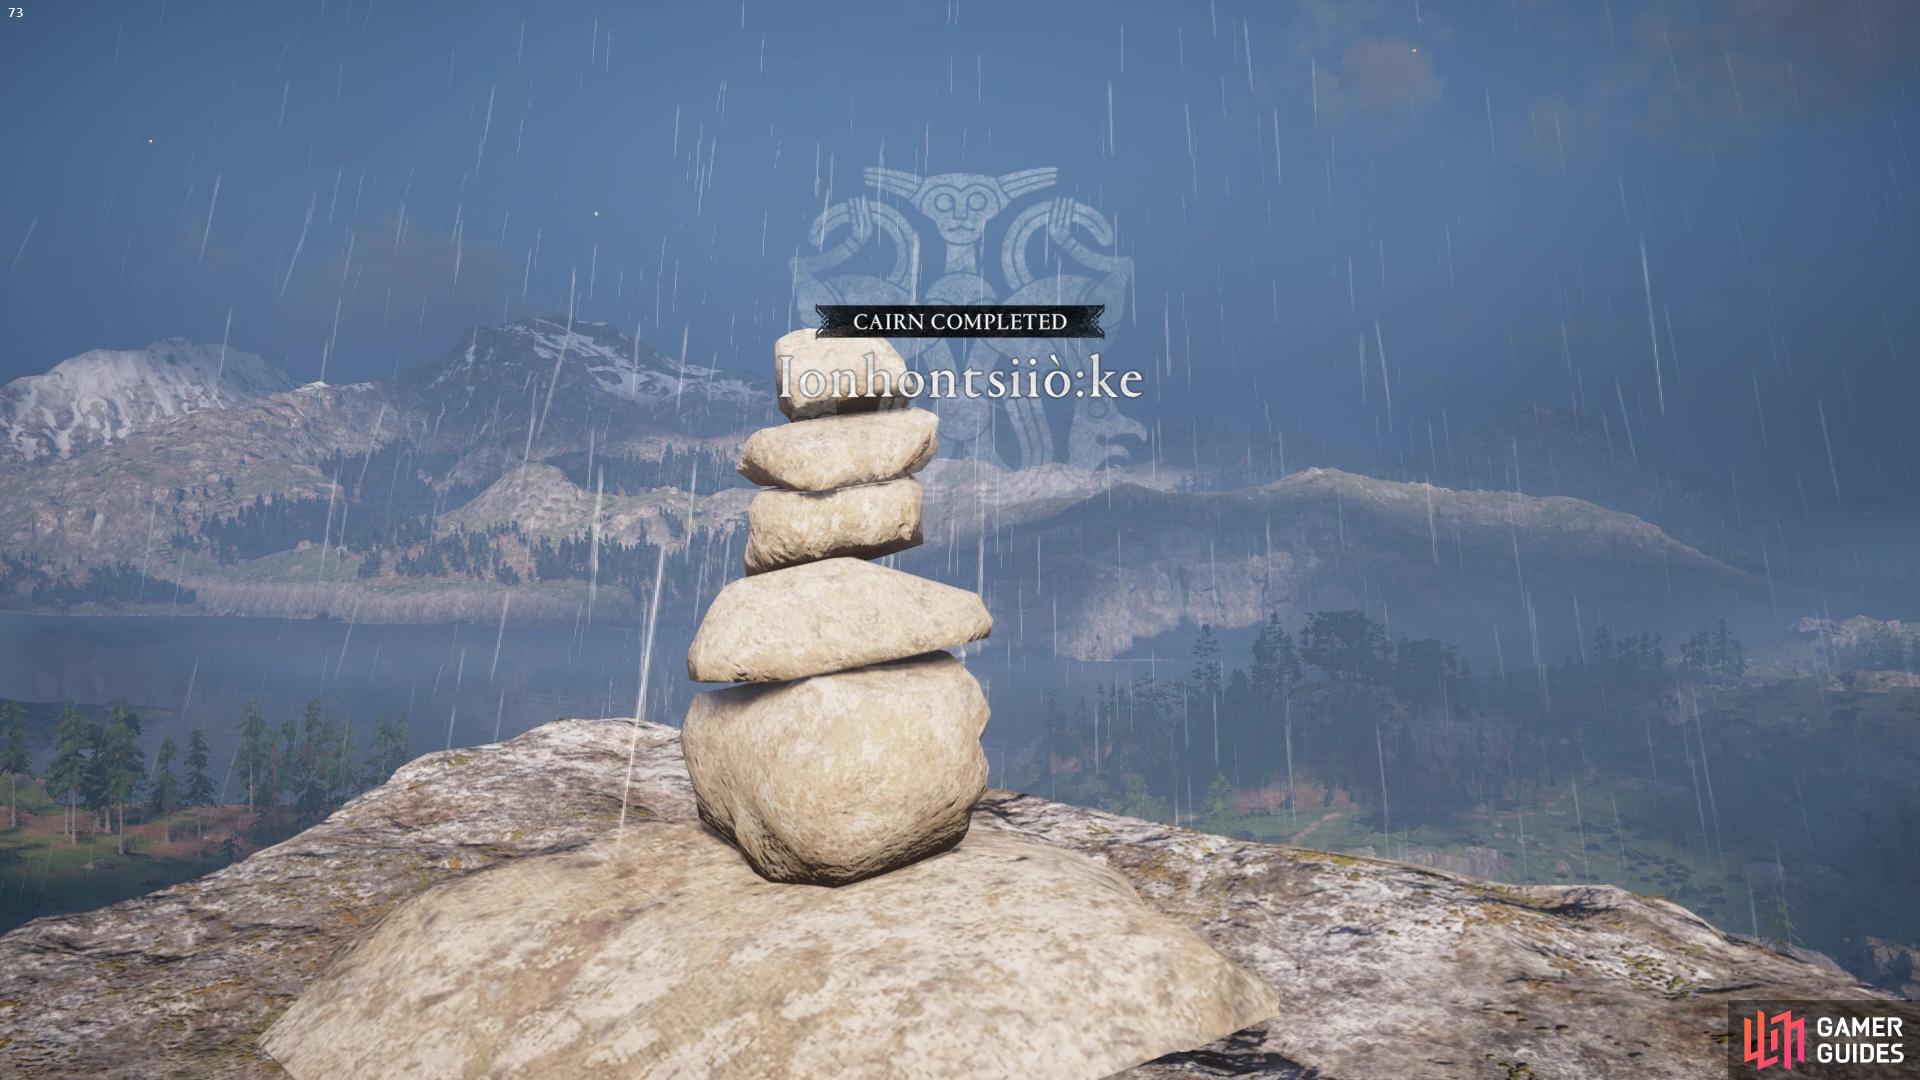 it's an easy stack of stones to build!